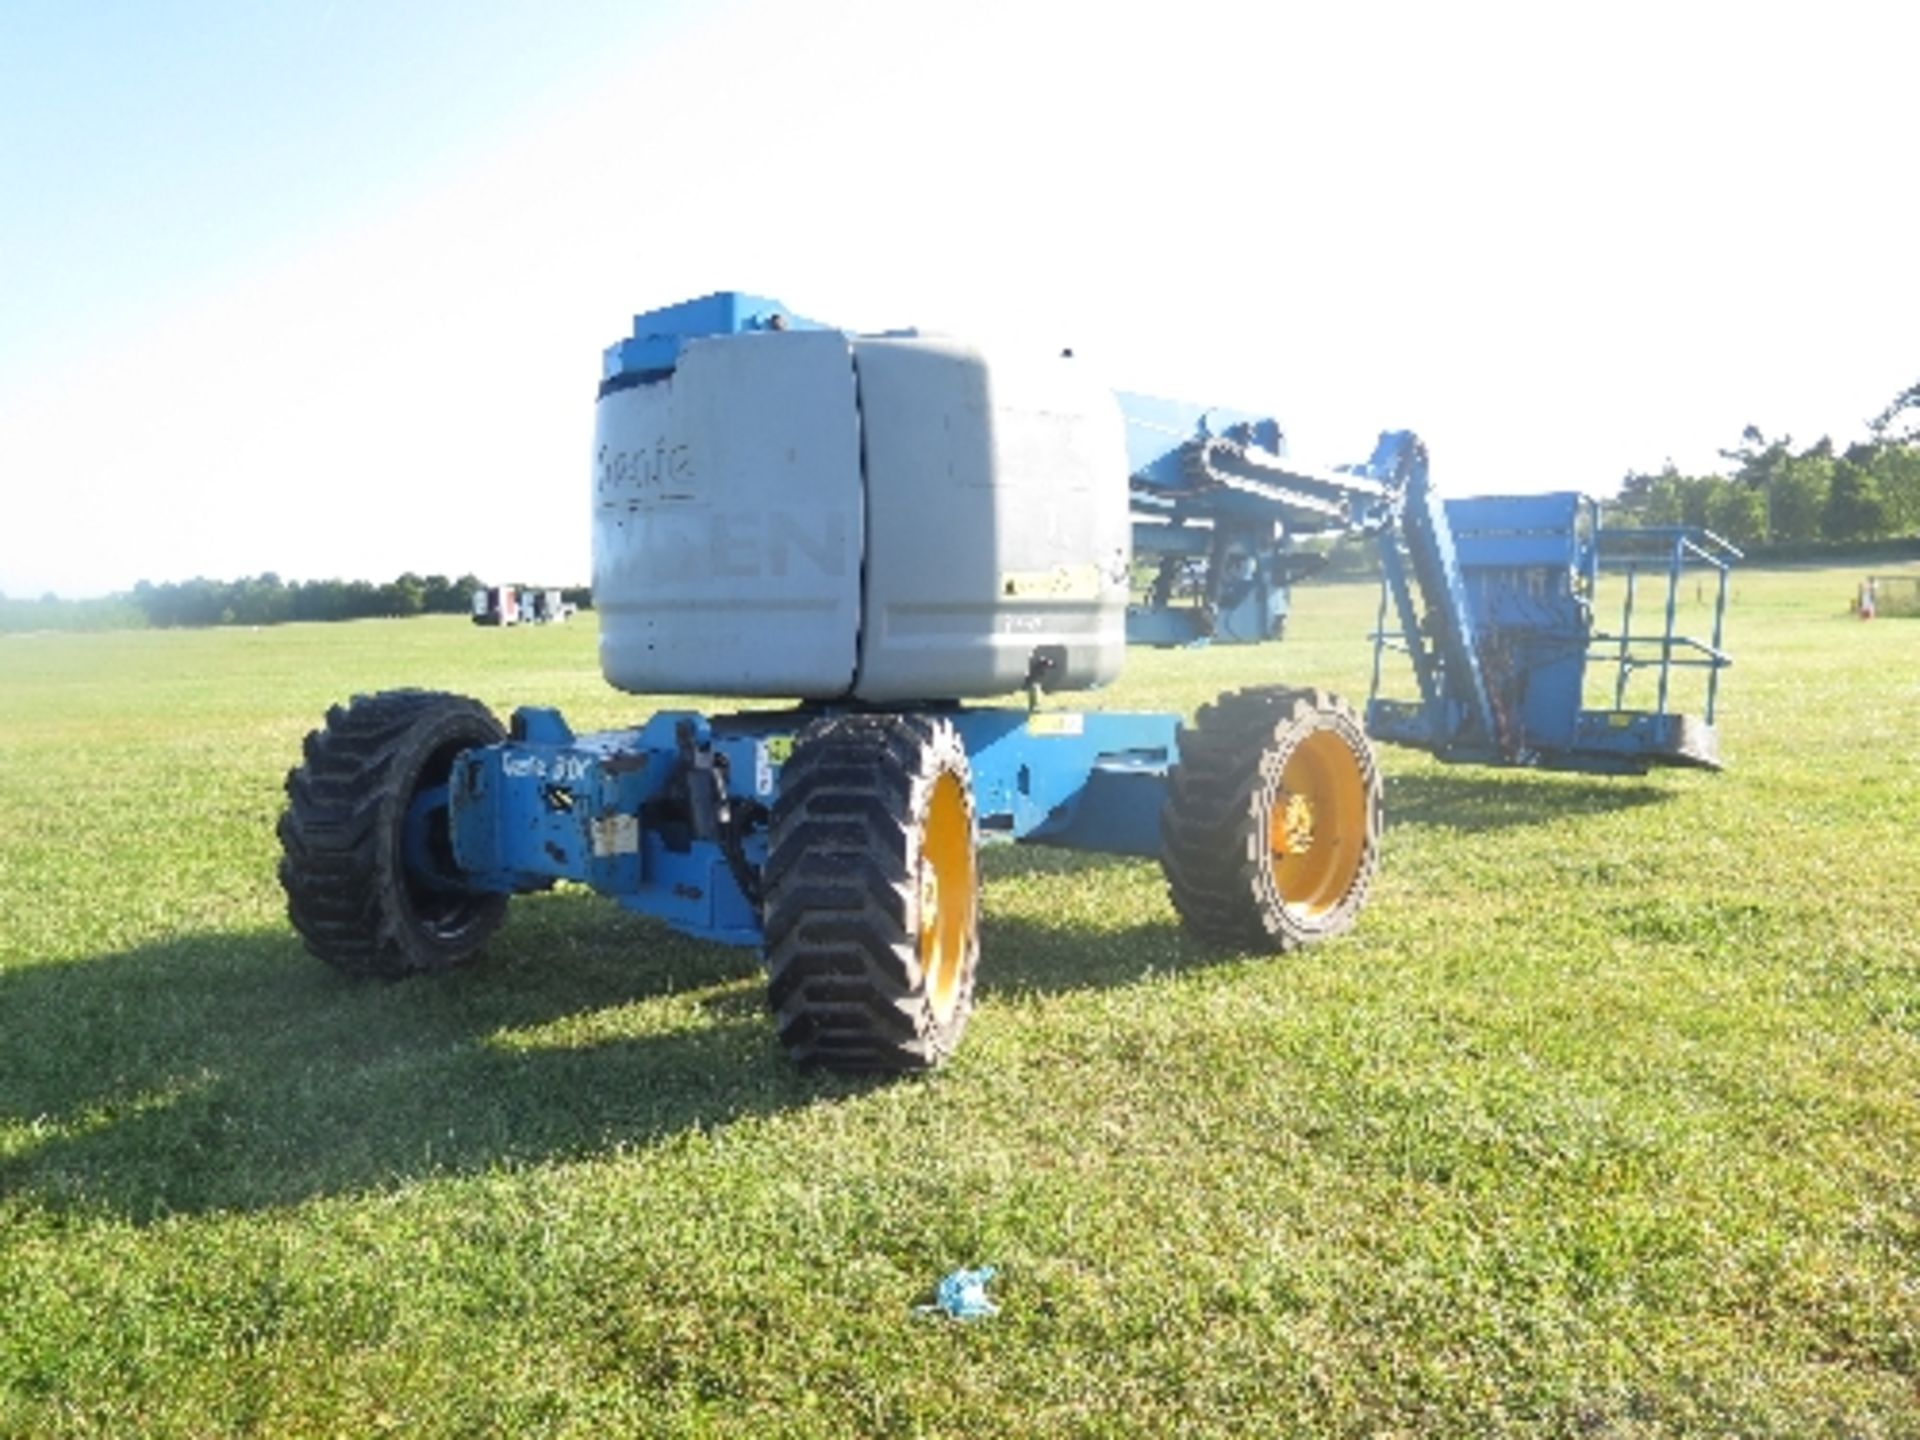 Genie Z45/25 artic boom 2437 hrs 2007 5000086ALL LOTS are SOLD AS SEEN WITHOUT WARRANTY expressed,